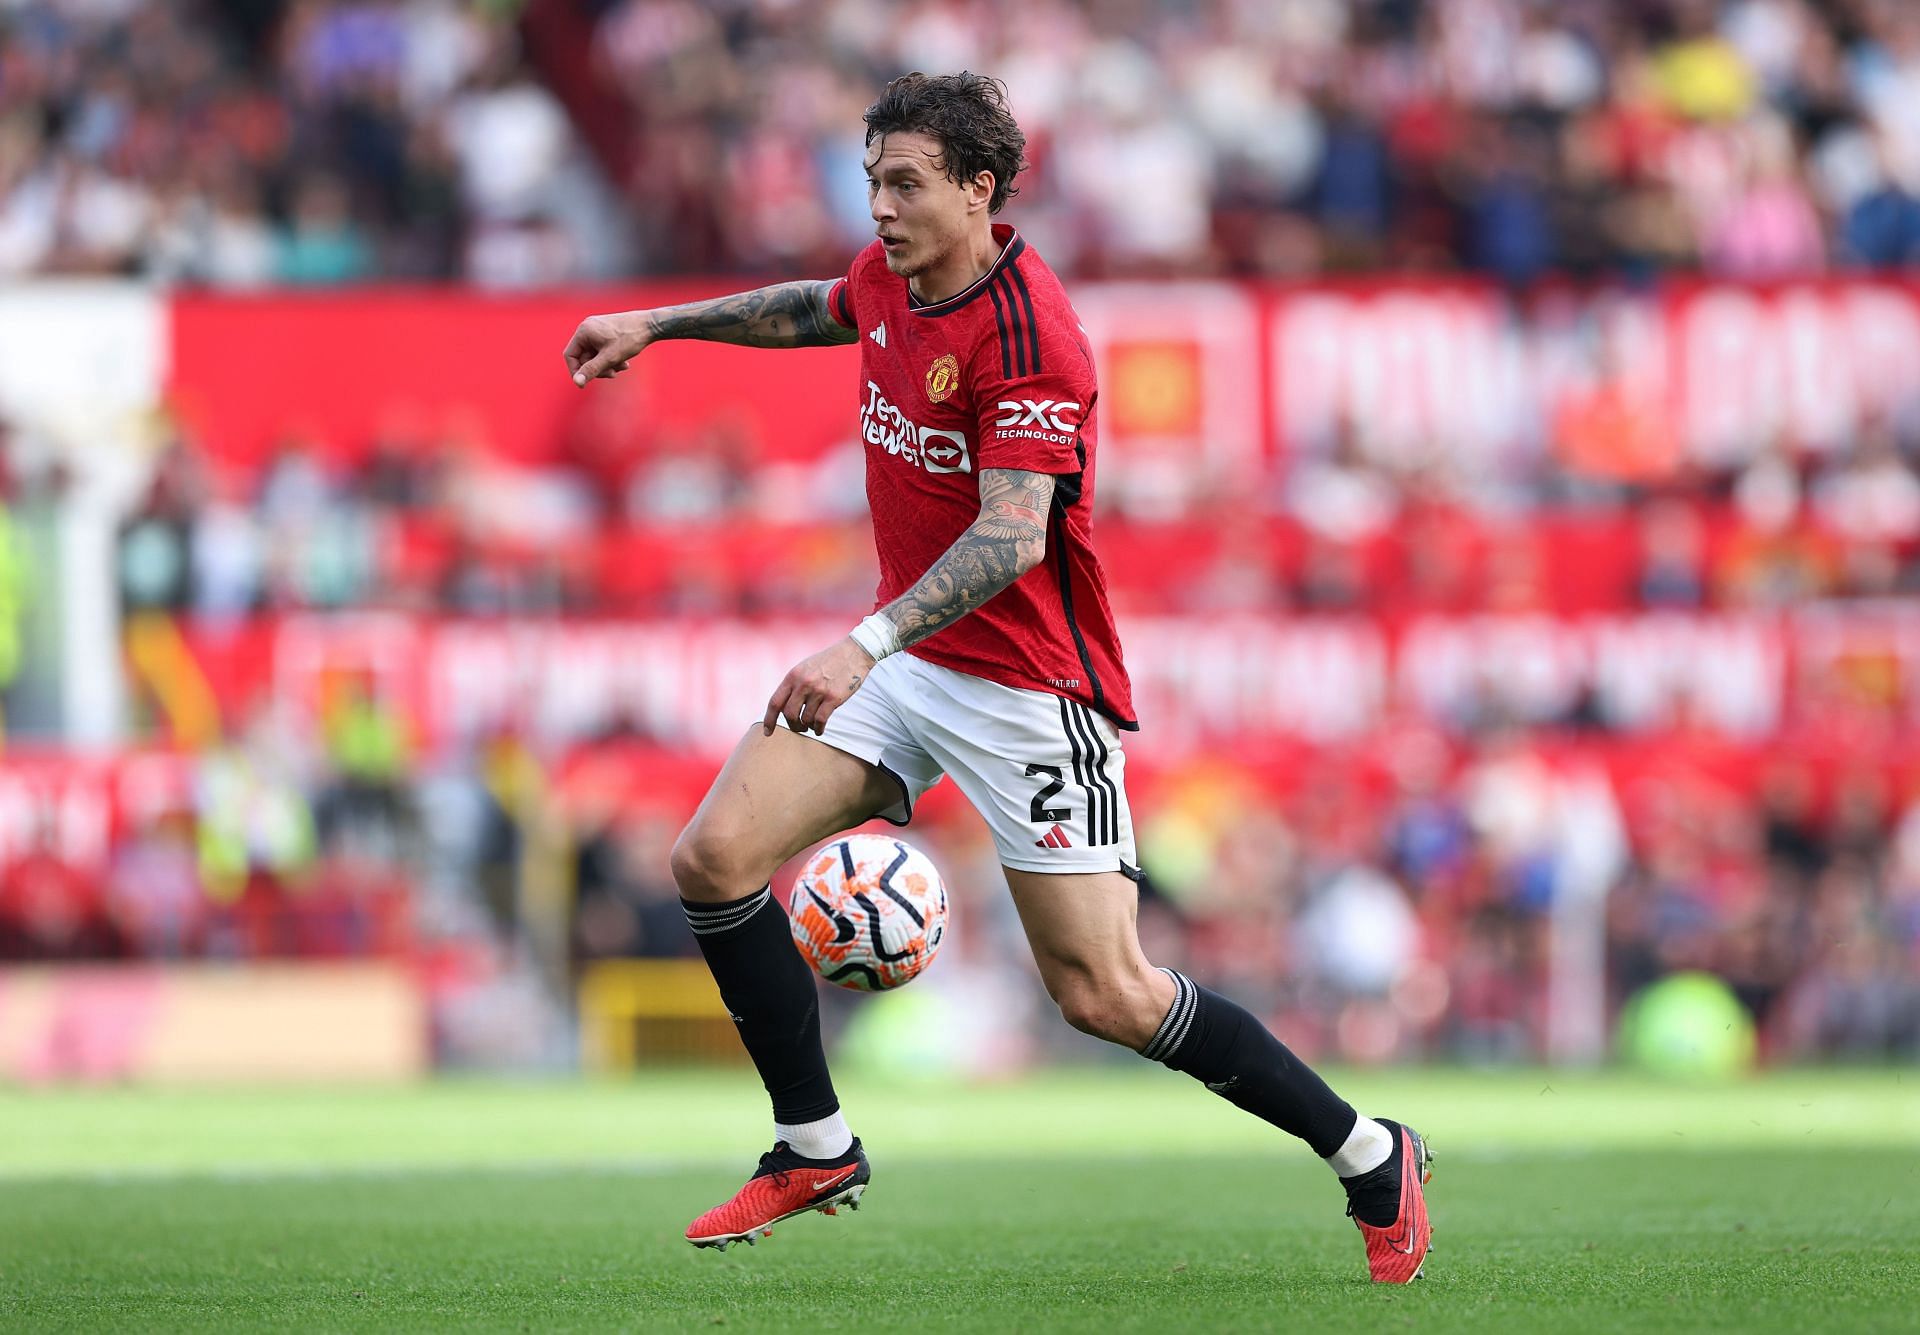 Manchester United take on Brentford this weekend